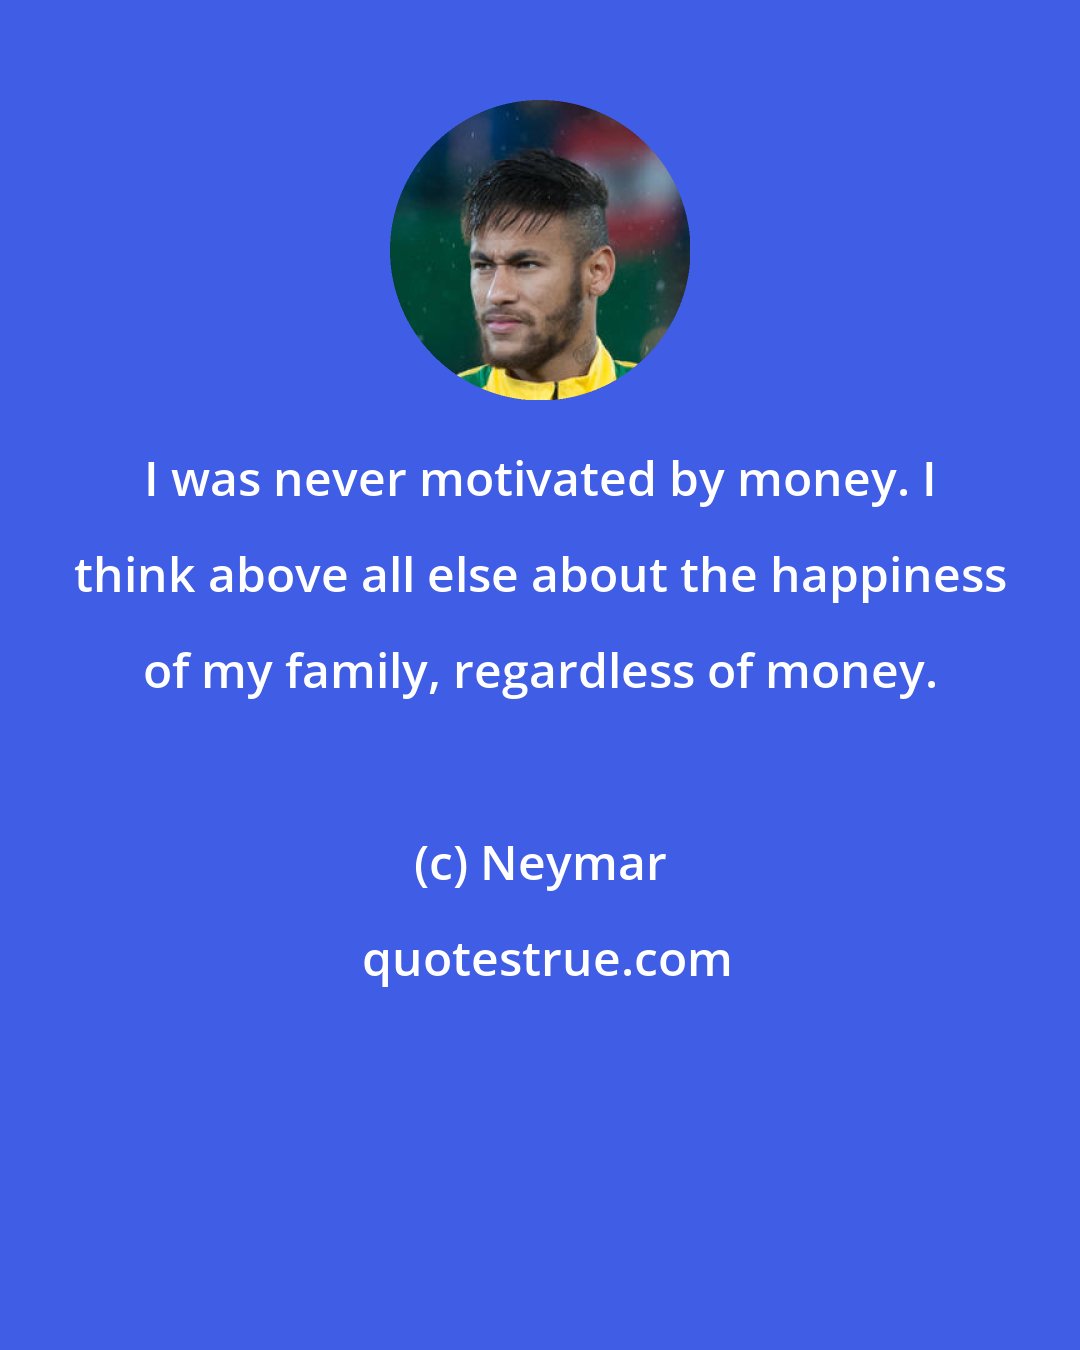 Neymar: I was never motivated by money. I think above all else about the happiness of my family, regardless of money.